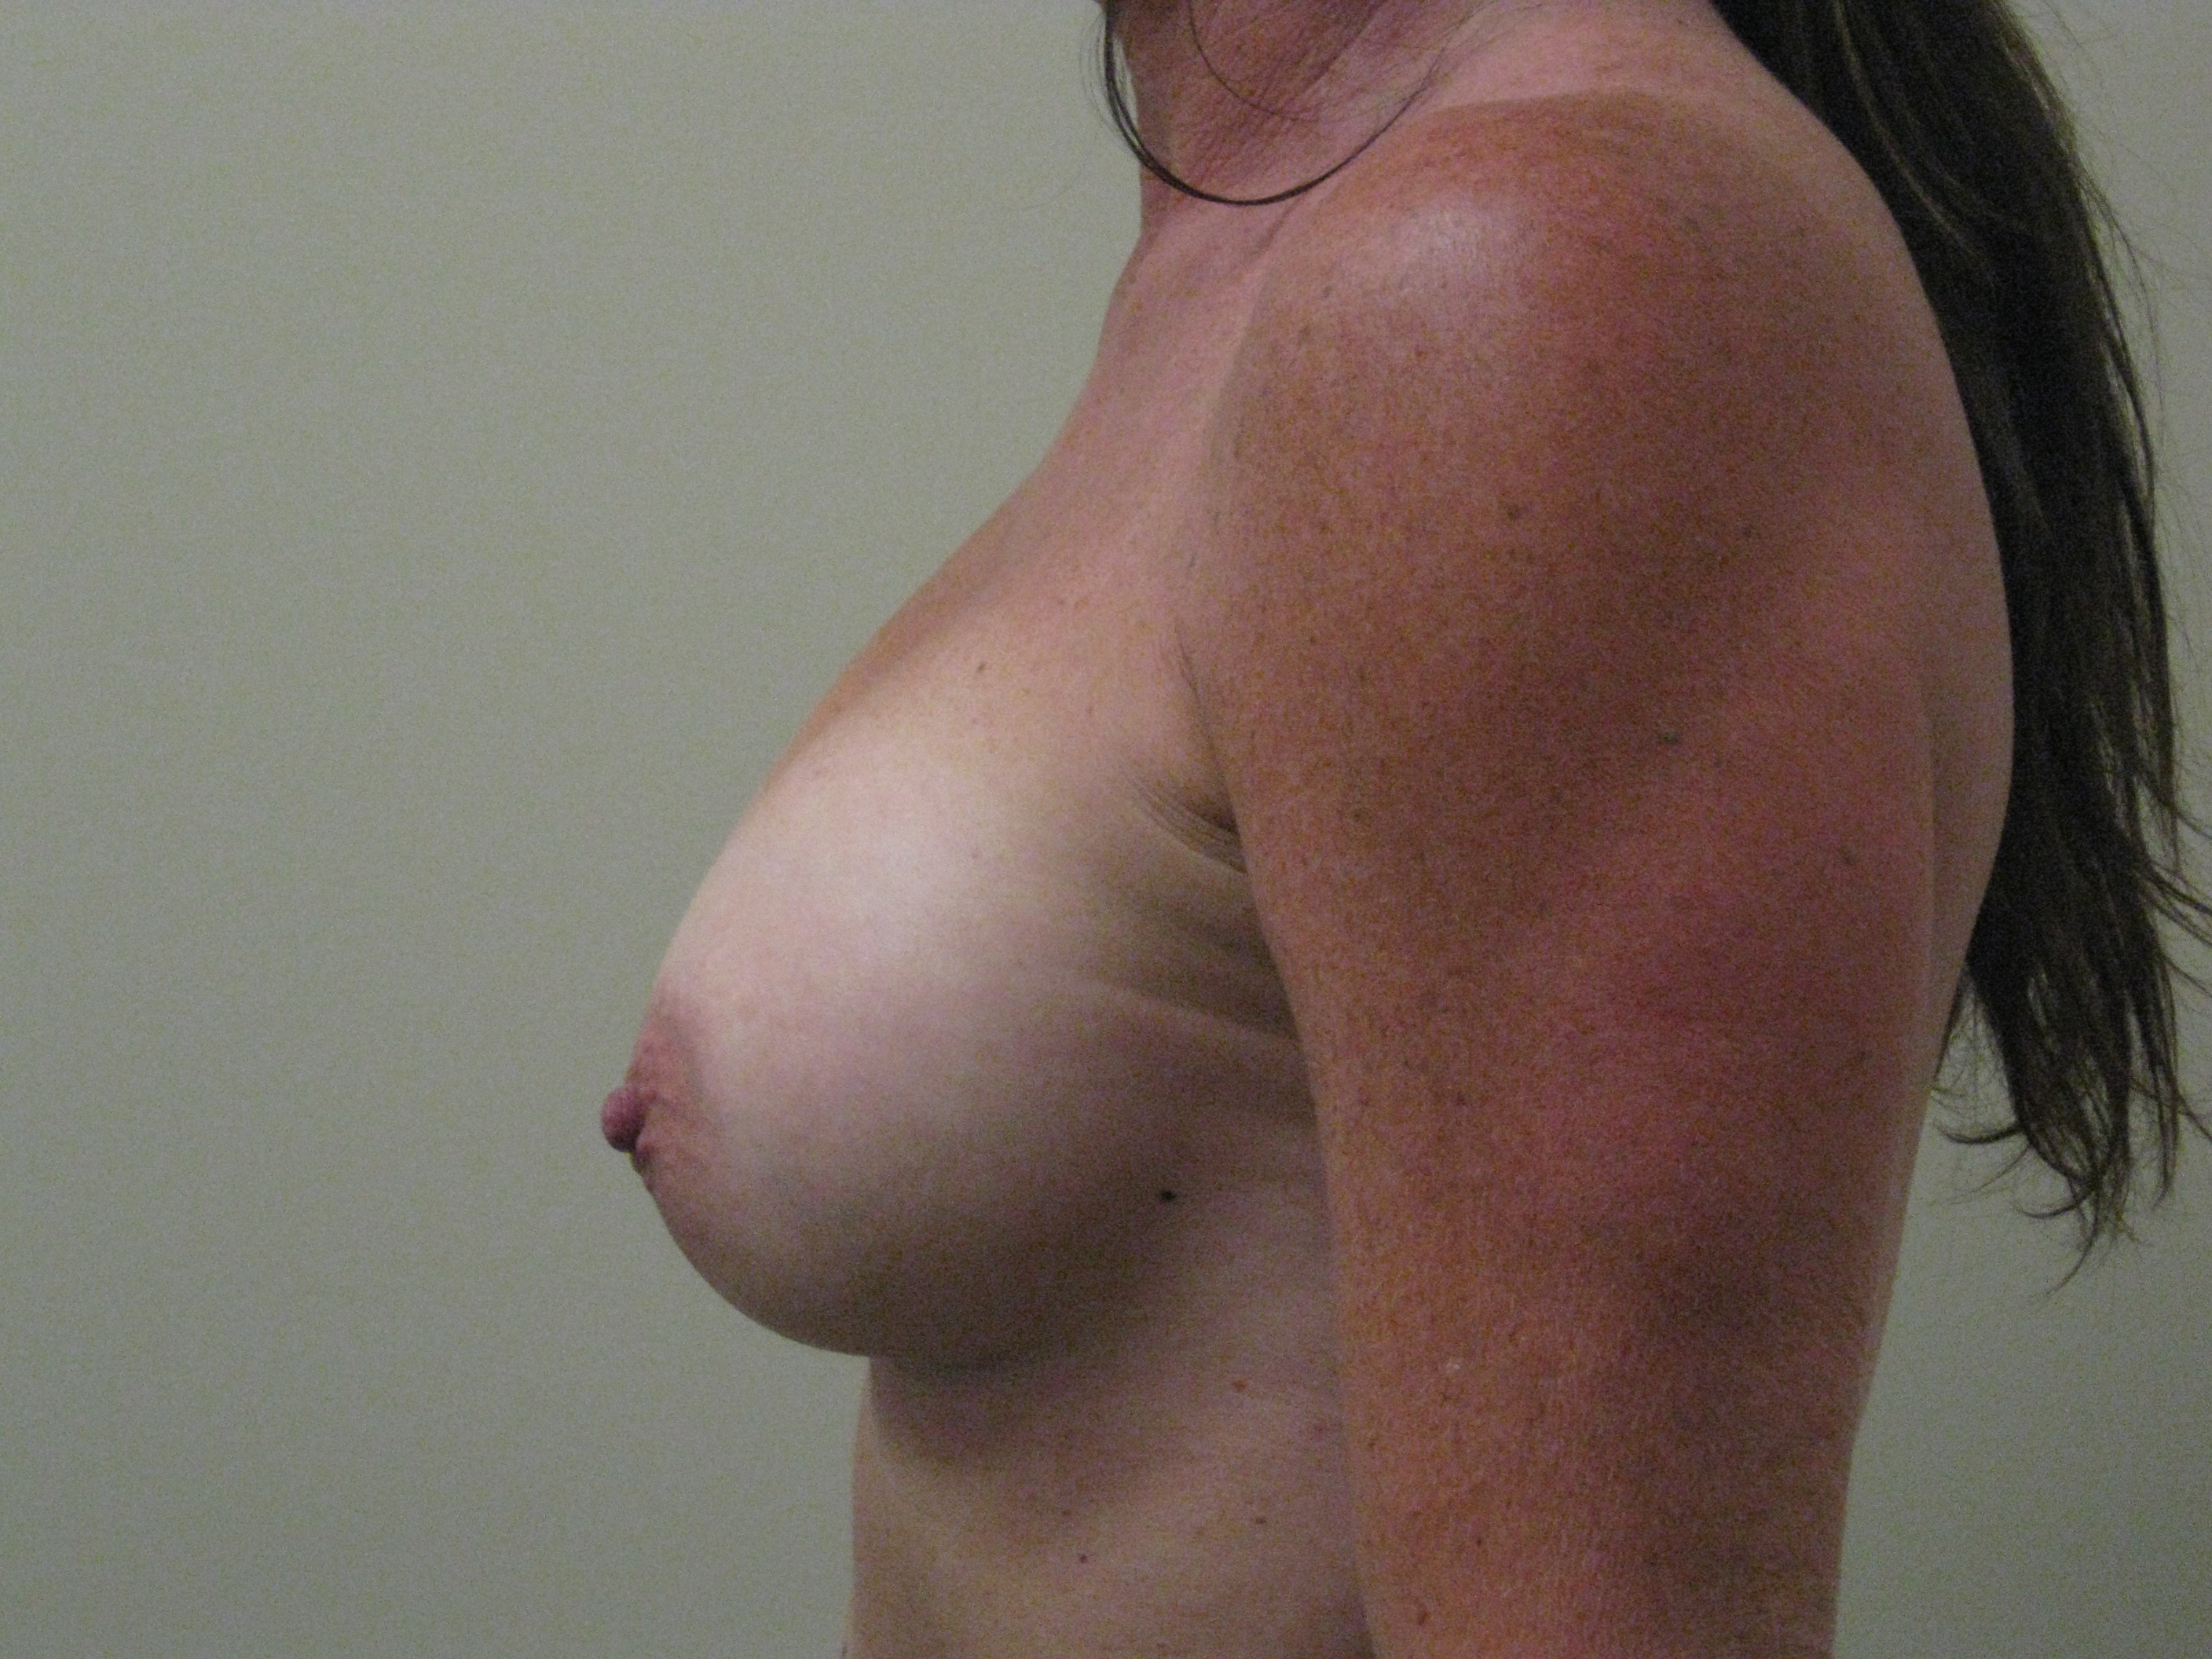 After-Breast Implants